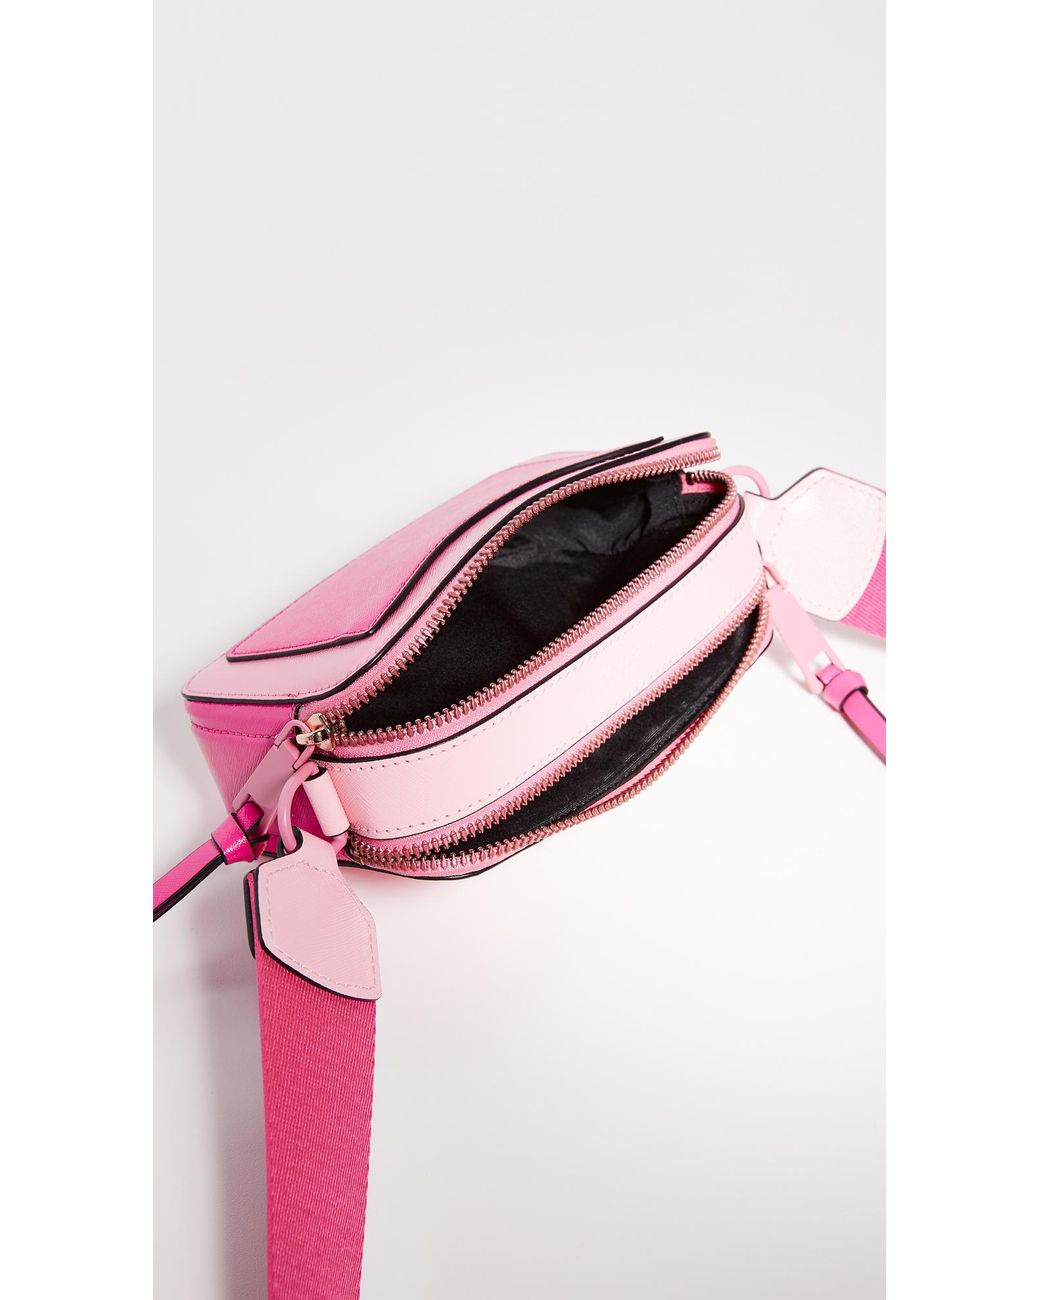 Marc Jacobs Hot Pink Snapshot Bag - $259 (13% Off Retail) - From